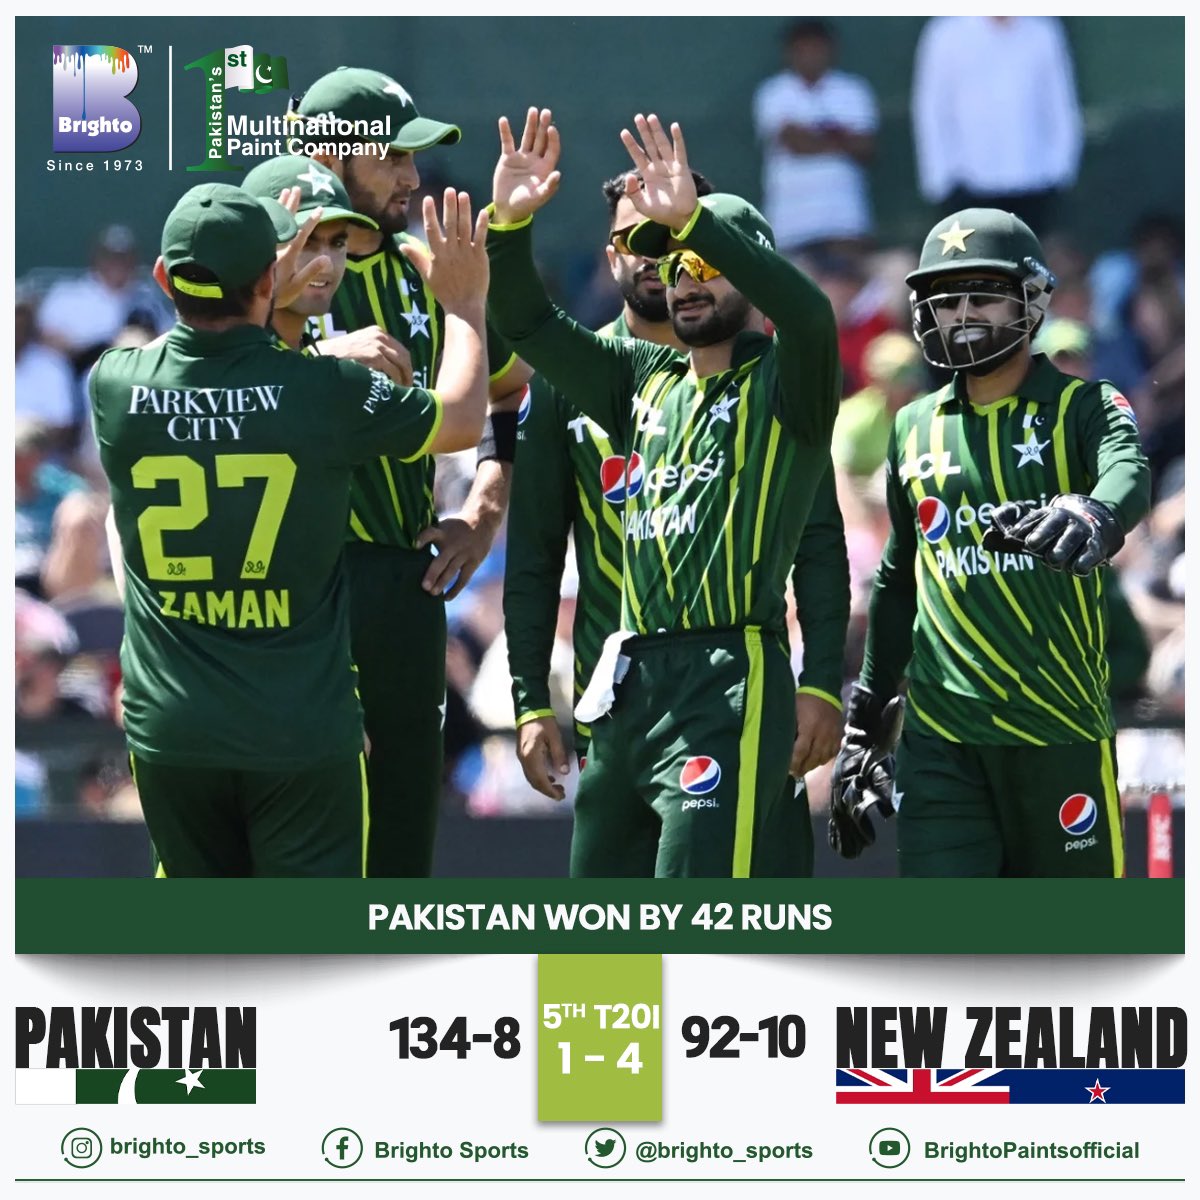 Pakistan won the match by 42 runs and defeated team New Zealand in the 5th T20i match.
#BrightoPaints #Brightoturns50 #BrightoGroup #Since1973 #BrightoSports #t20series #t20match #pakistan #newzealand